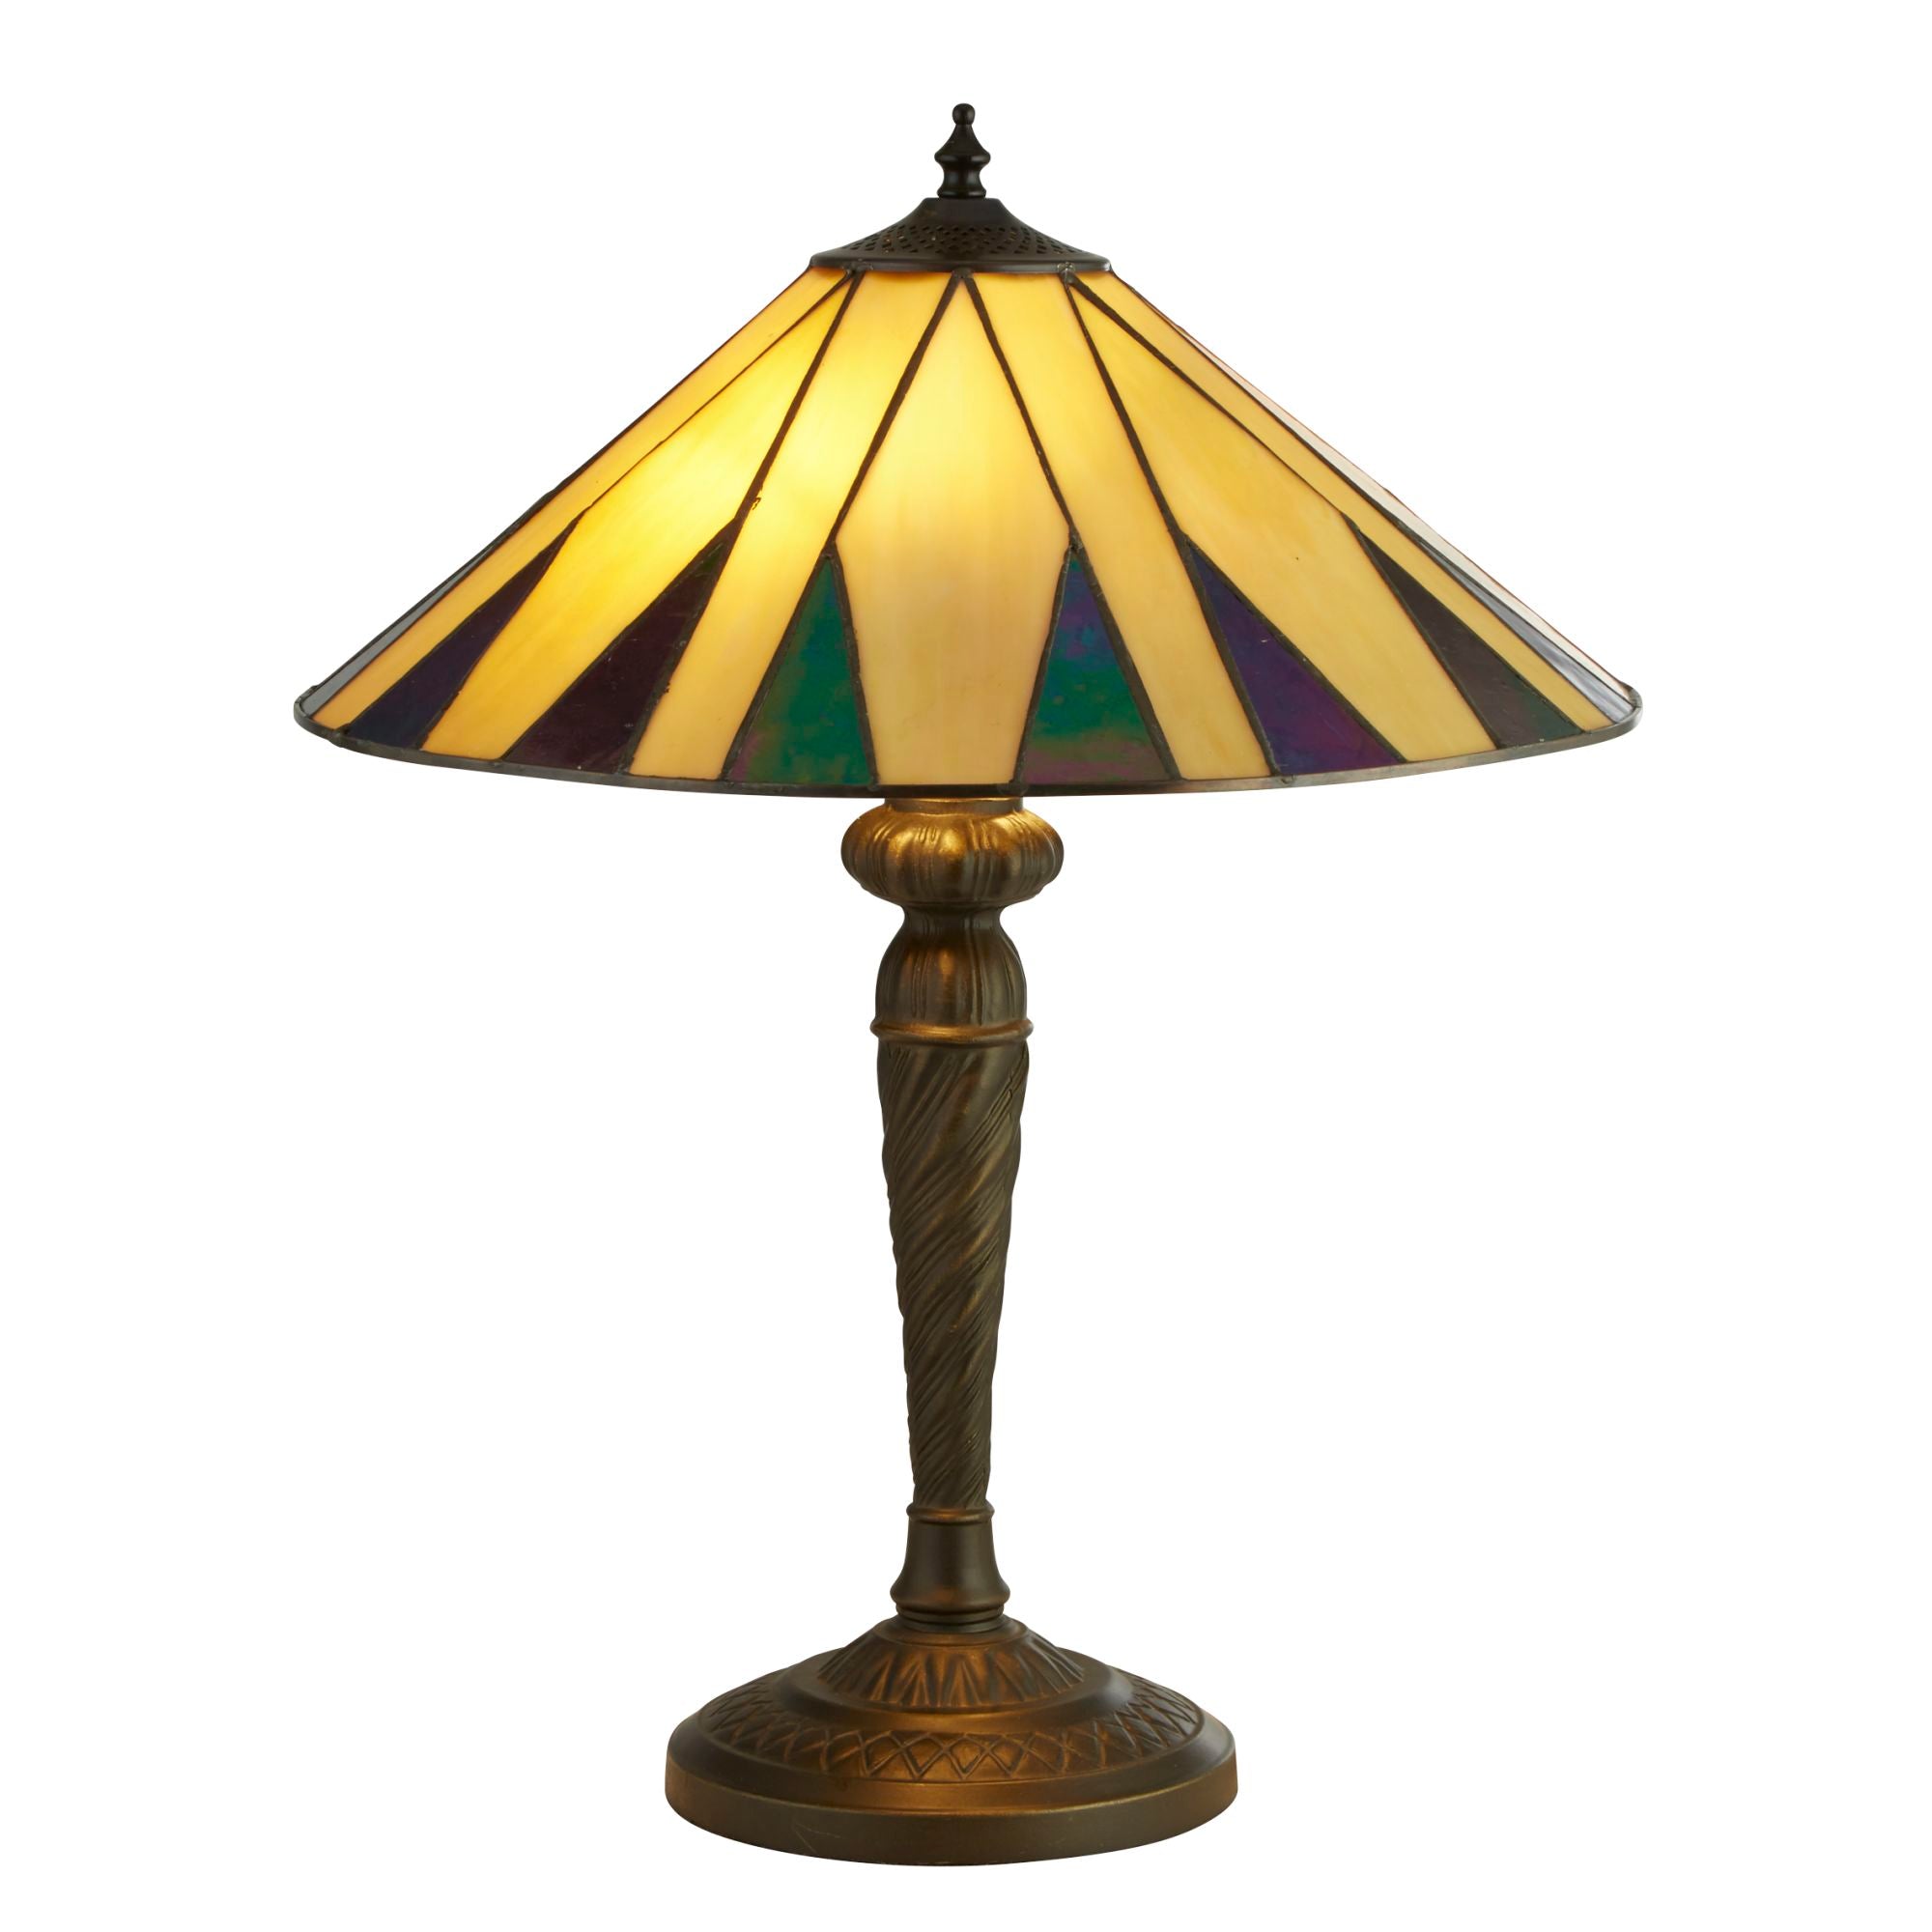 Charleston 53cm Antique Brass Stained Glass Tiffany Table Lamp